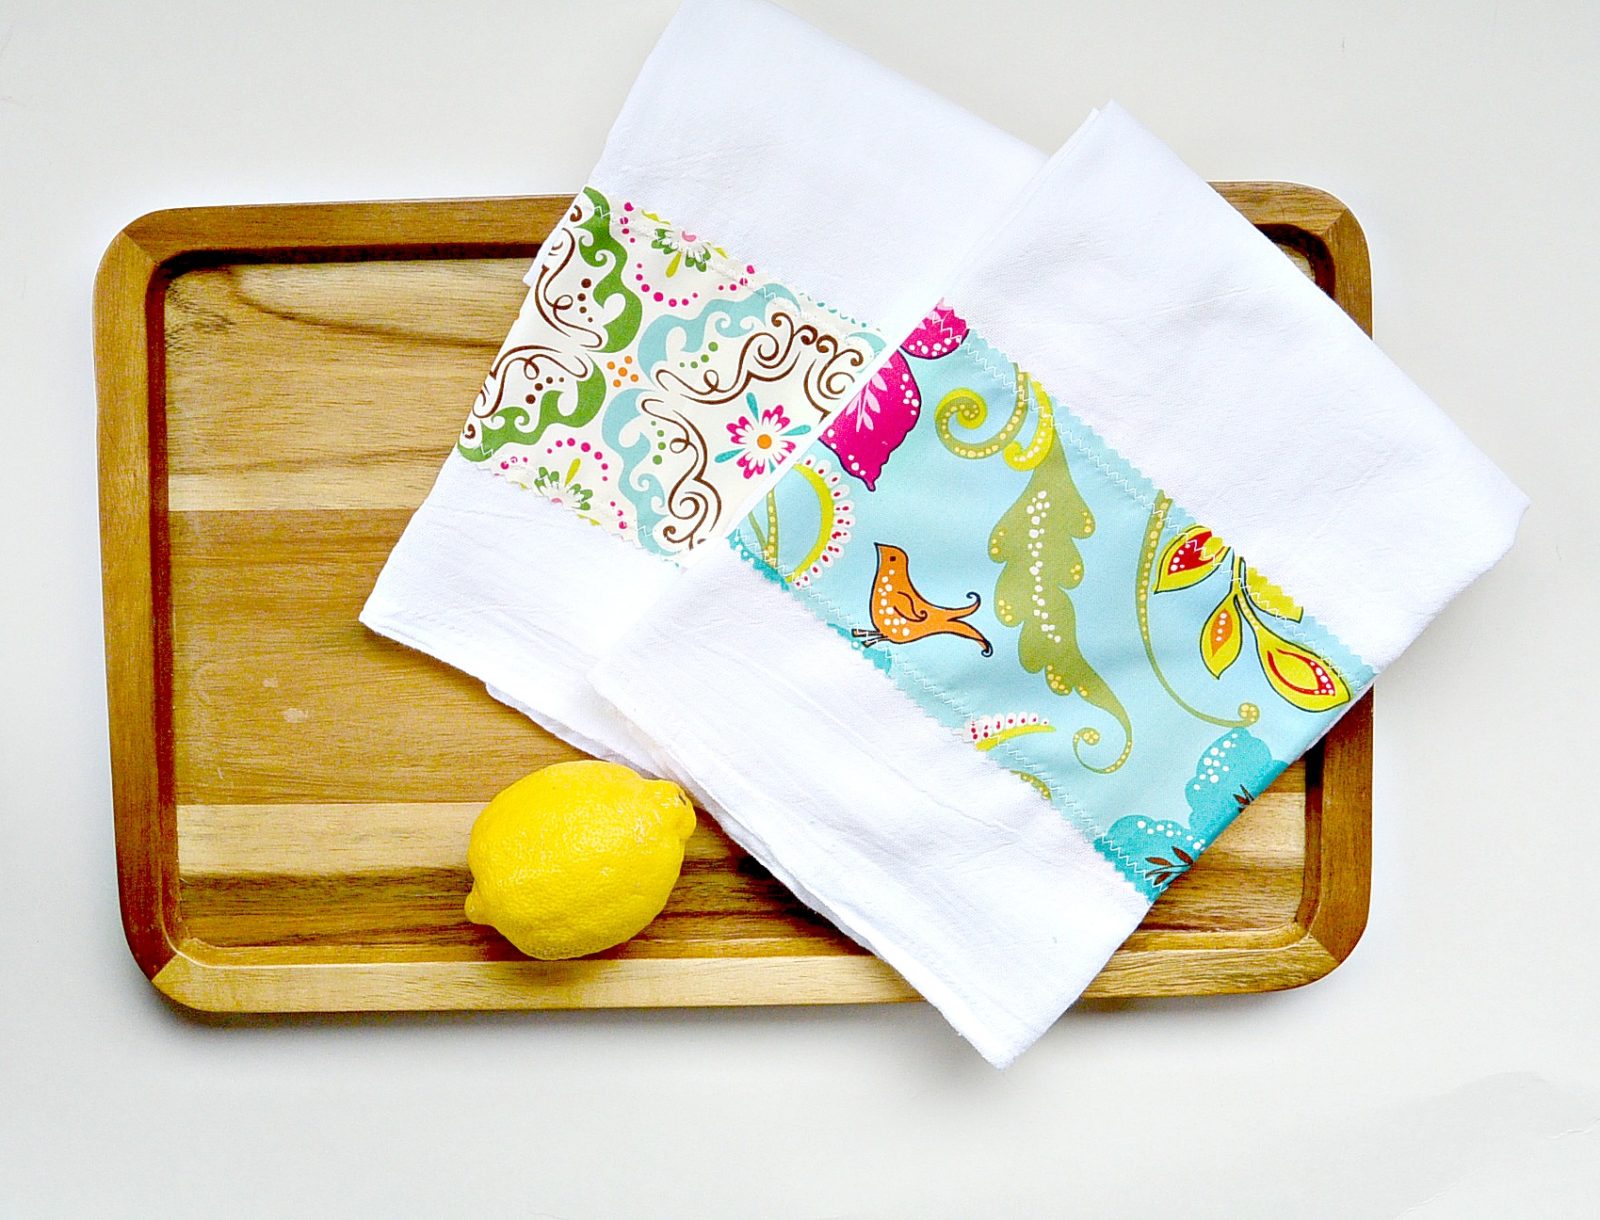 Tutorial and Pattern for How to Make Cute Flour Sack Towels